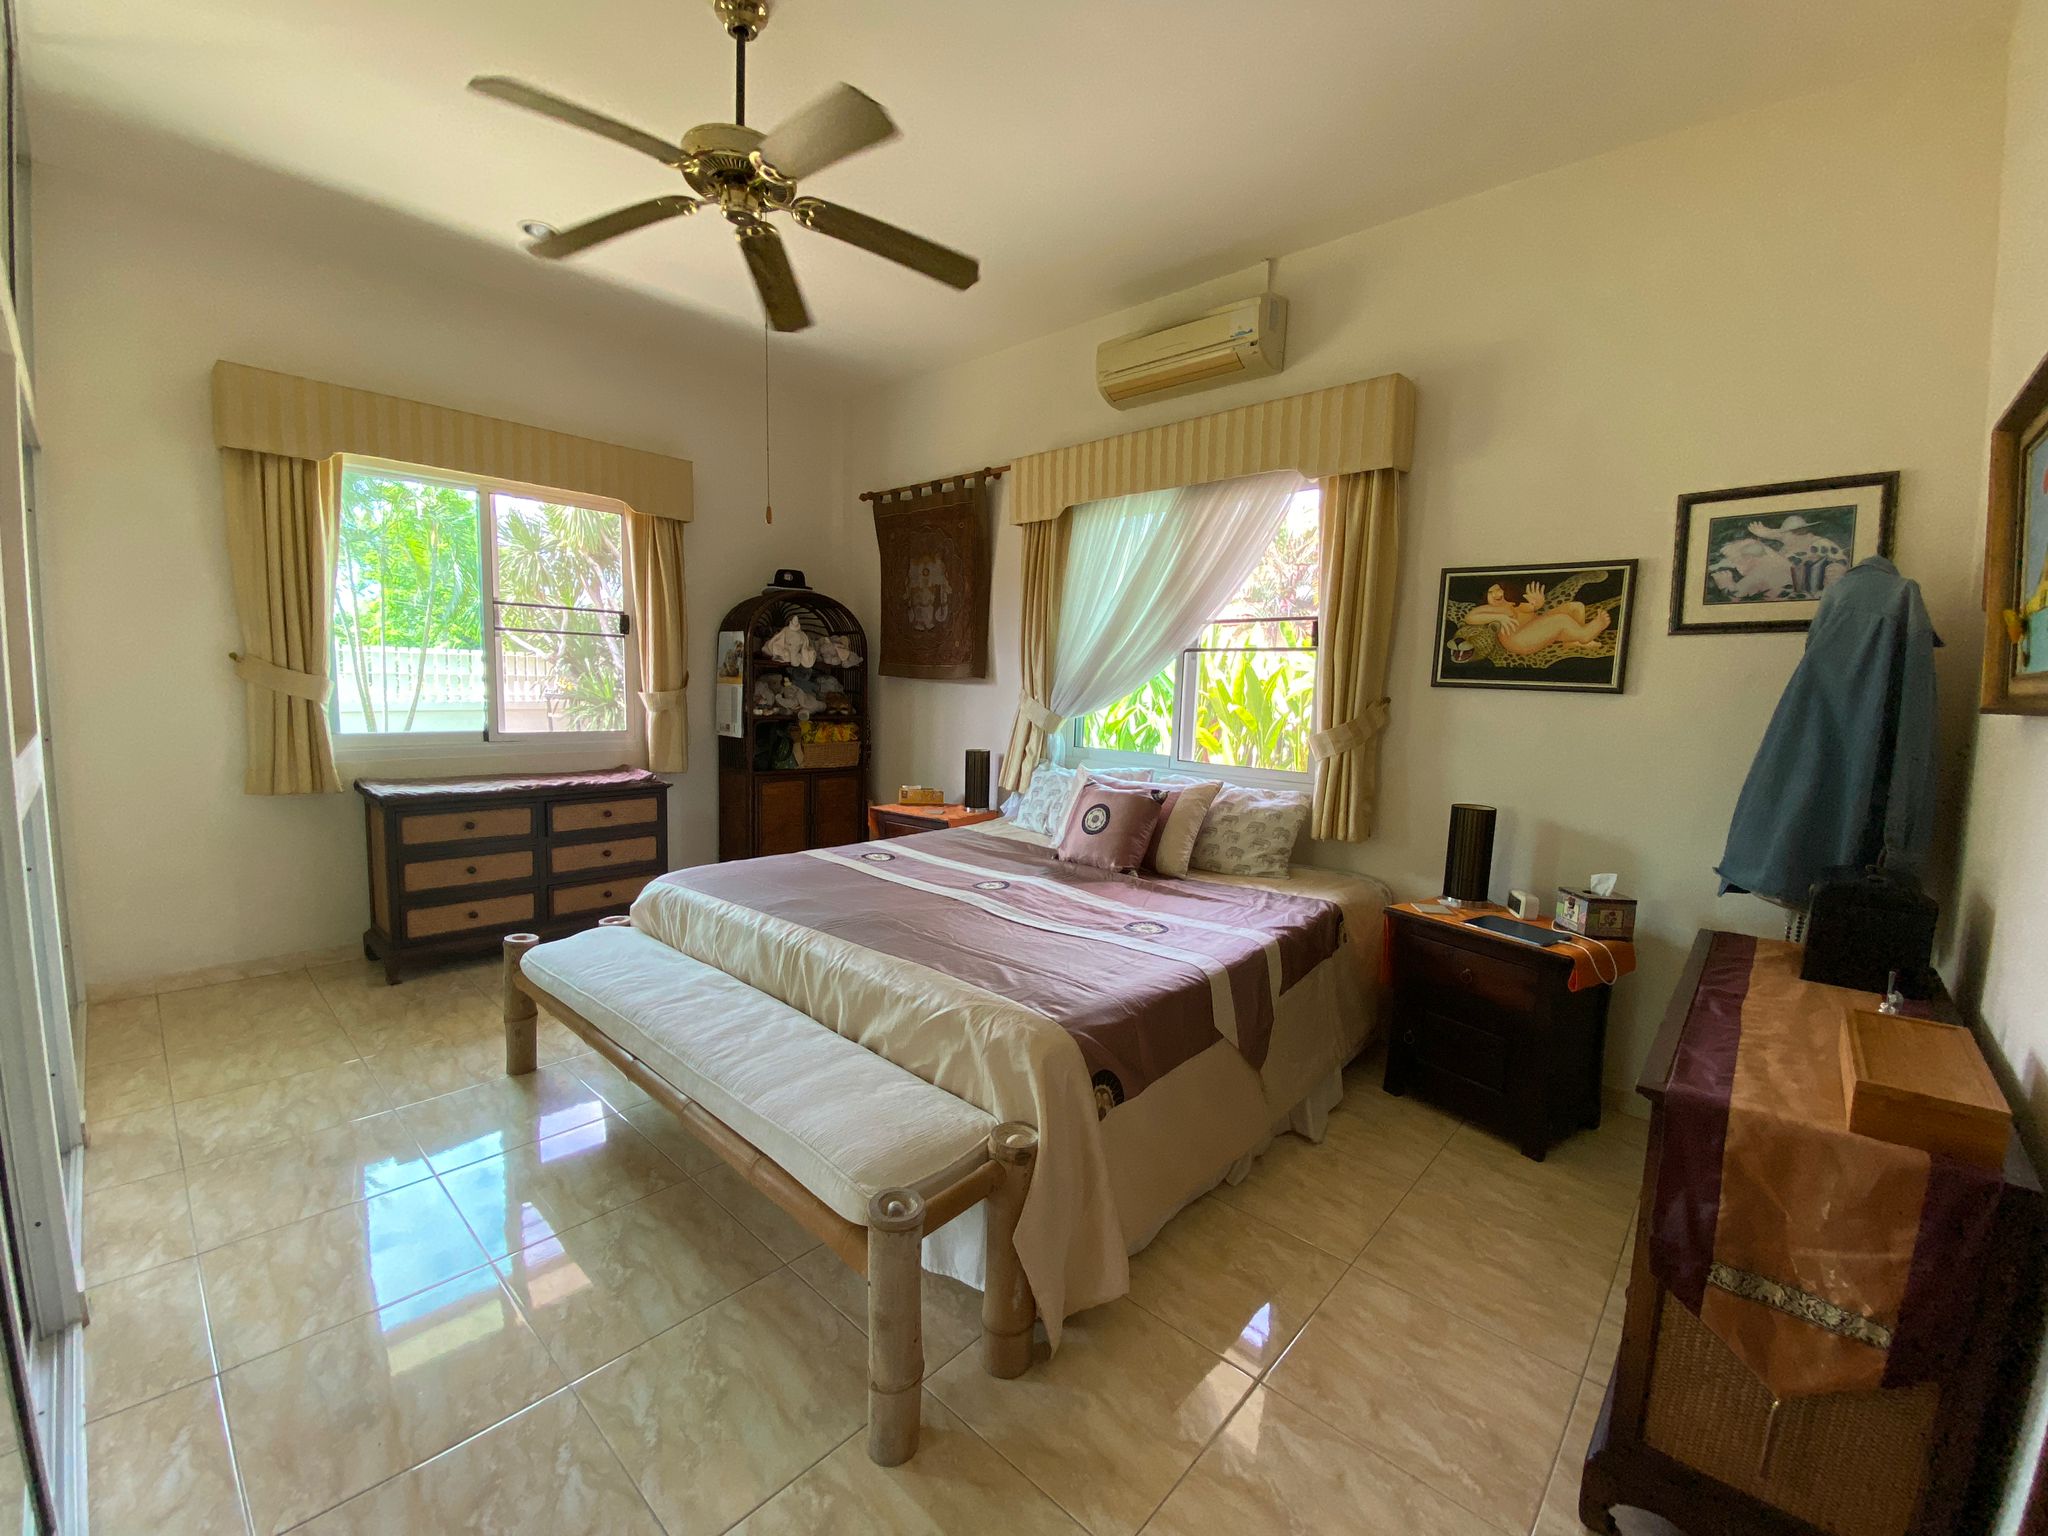 Pool Villa with 2 bedrooms in the Huay Yai. Urgent sale!